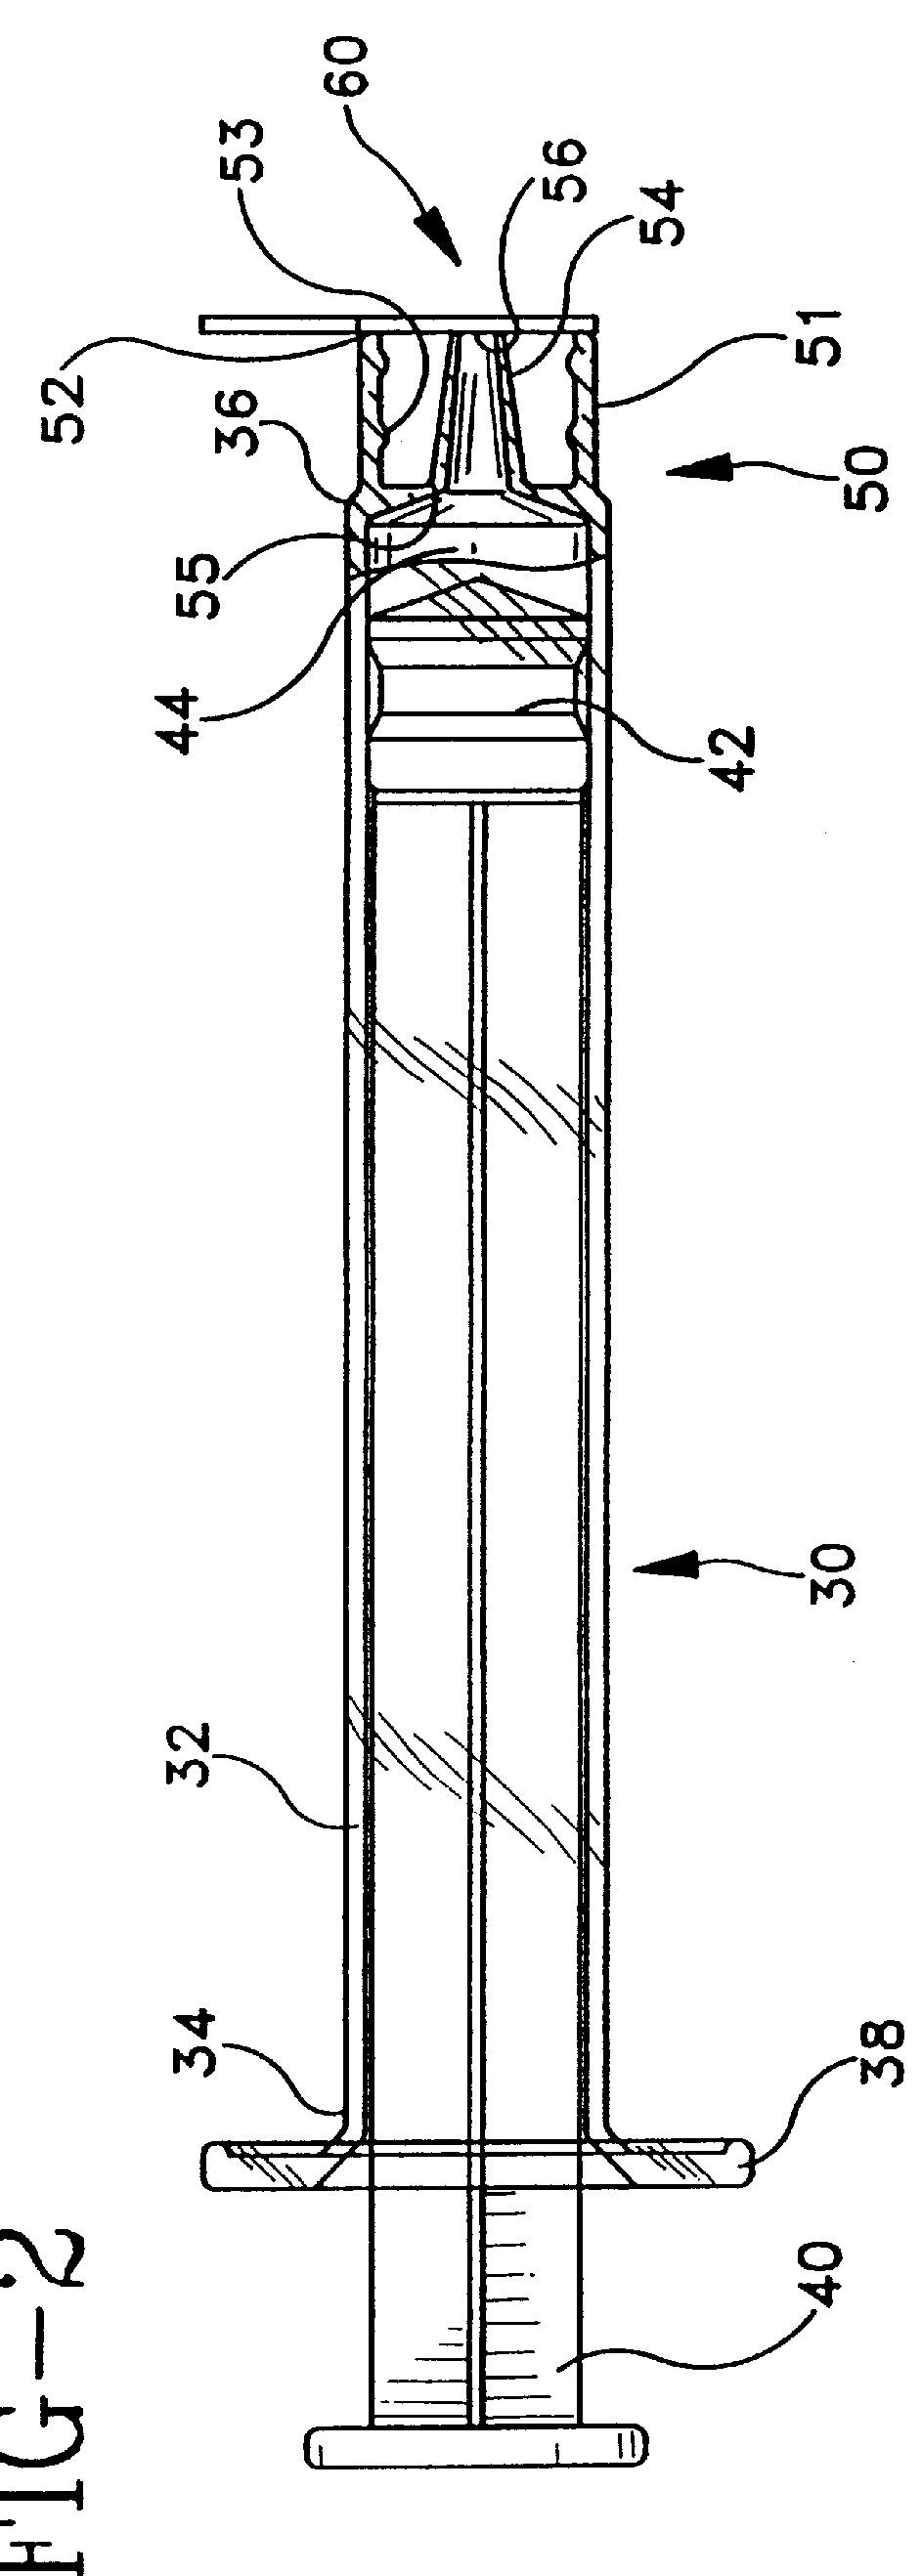 Protective sealing barrier for a syringe